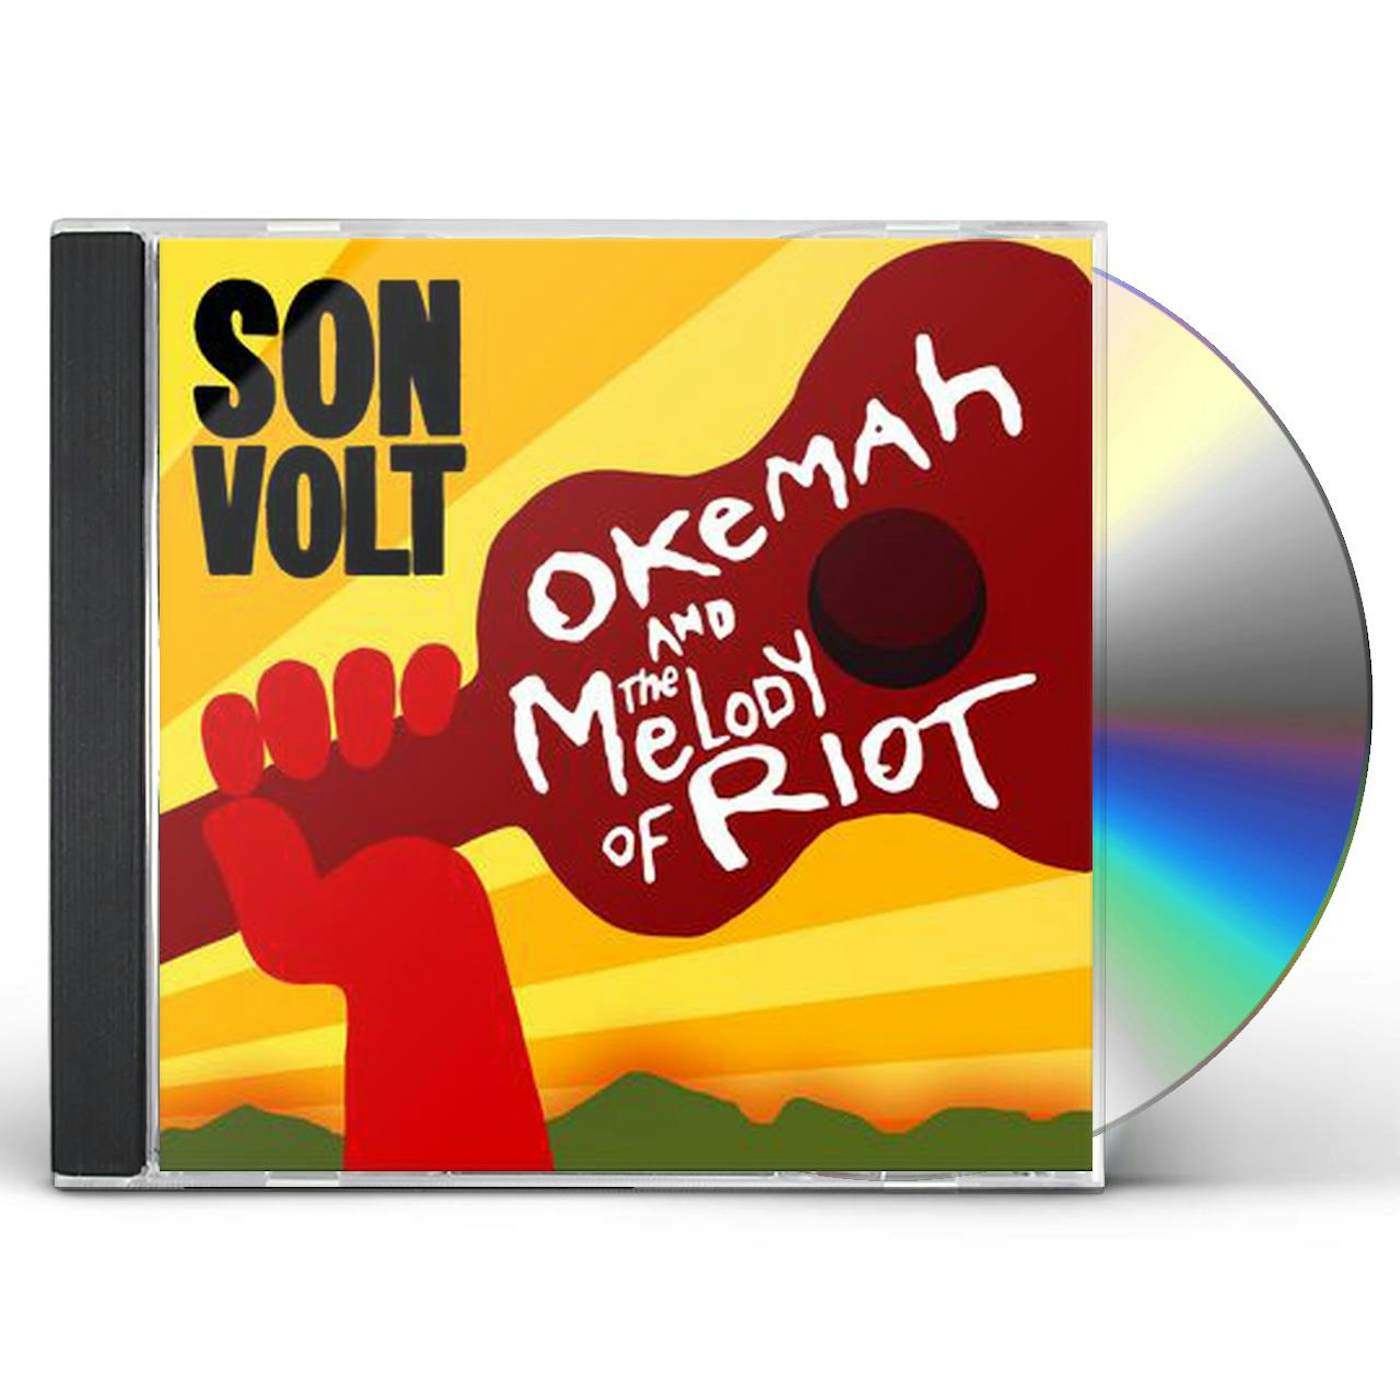 Son Volt OKEMAH & THE MELODY OF RIOT CD